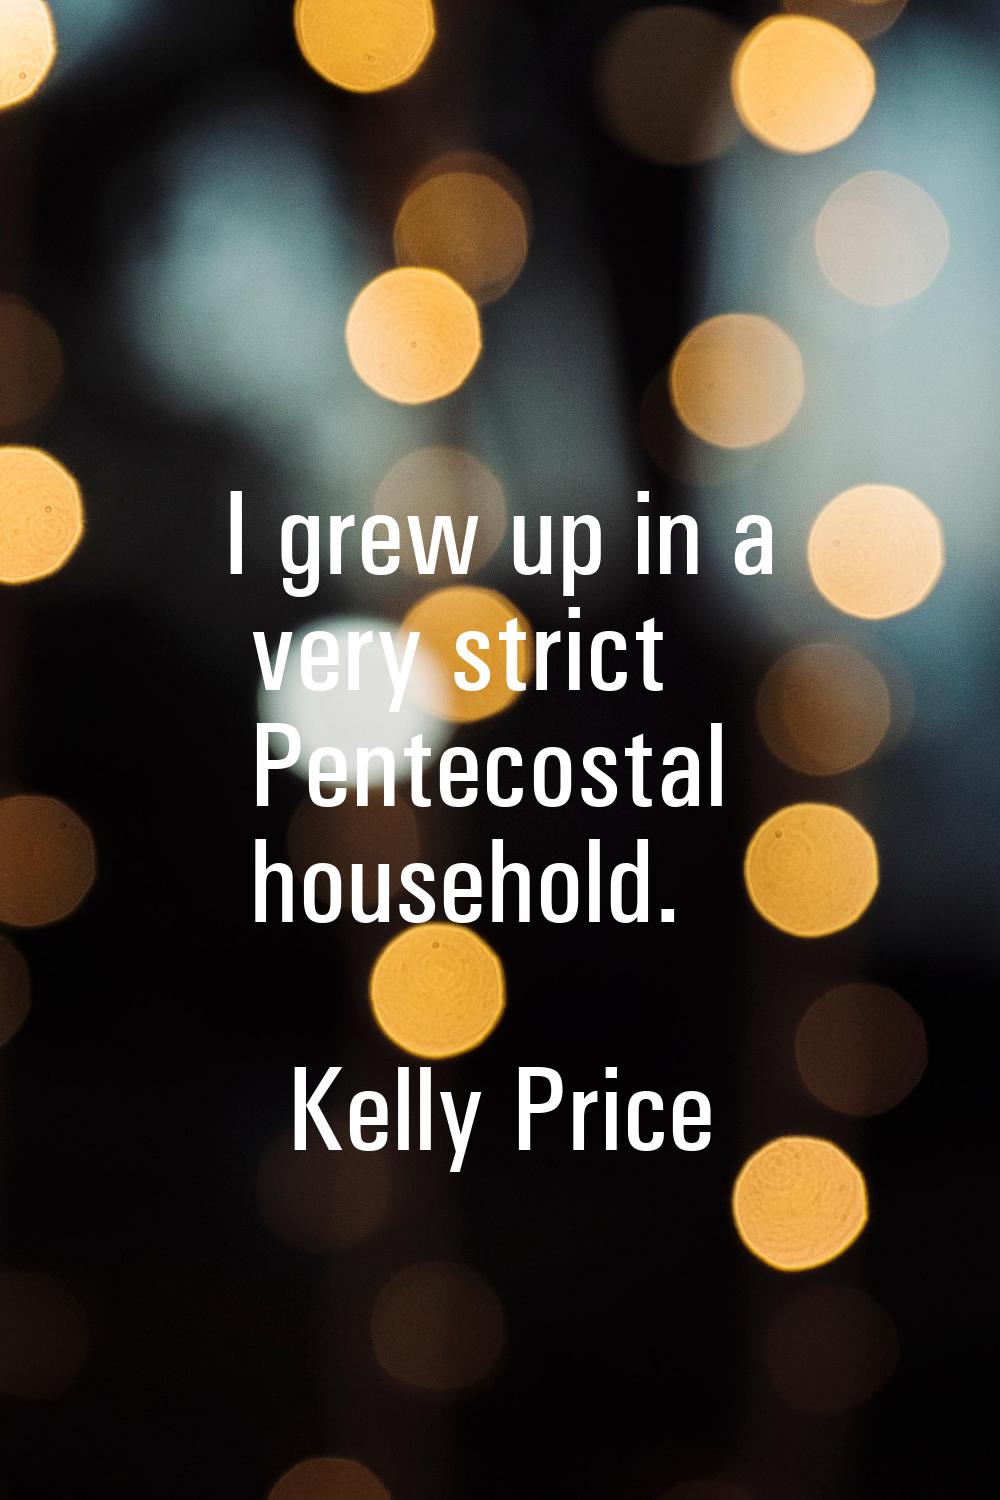 I grew up in a very strict Pentecostal household.